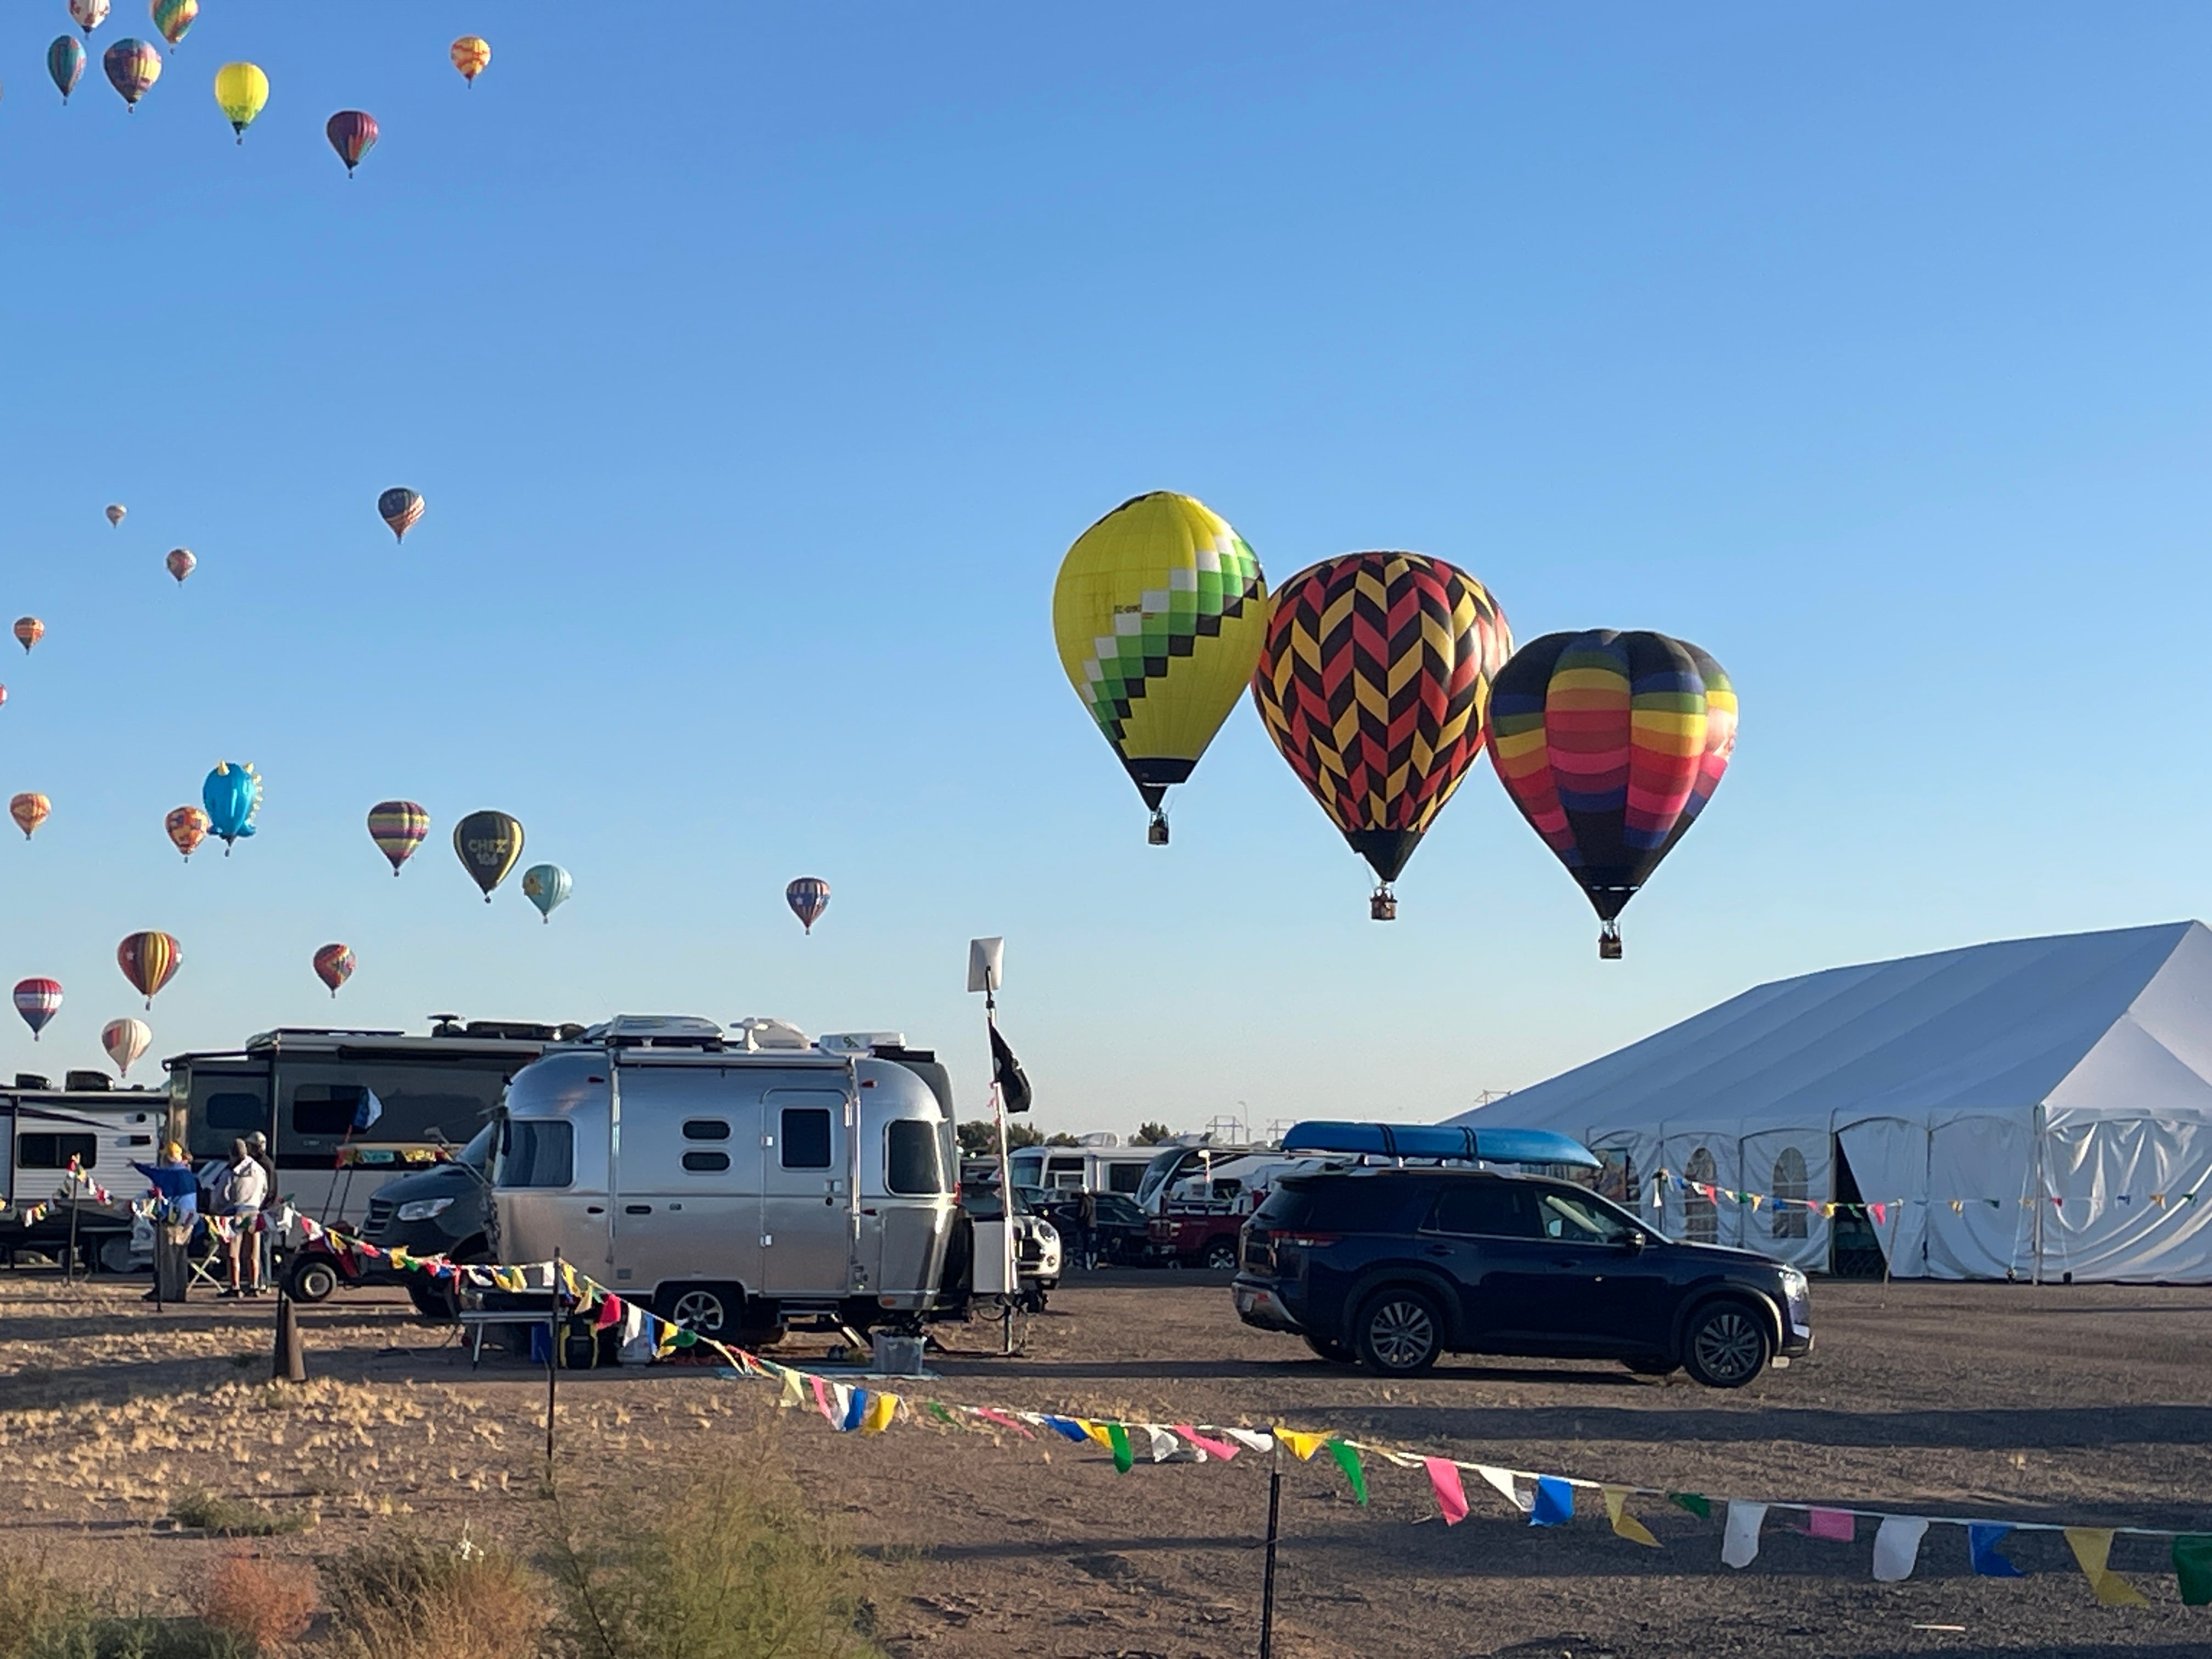 Camper submitted image from Abuquerque International Balloon Fiesta South Lot - 2